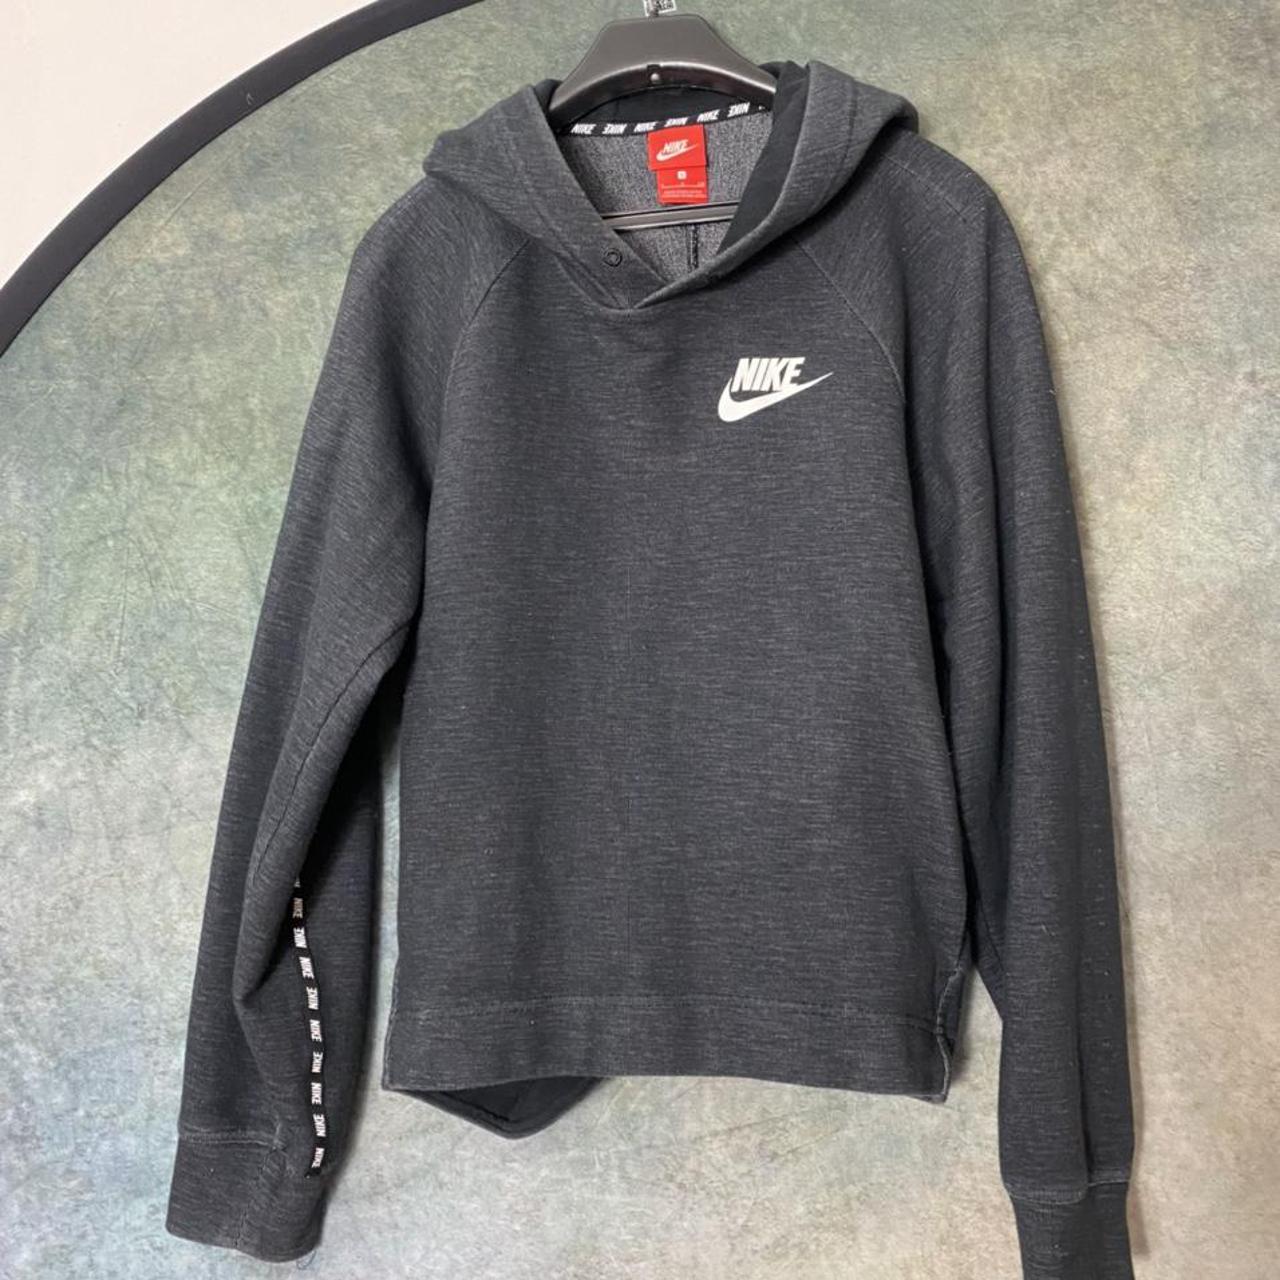 Dark Grey Nike Hoodie Perfect for working out or... - Depop